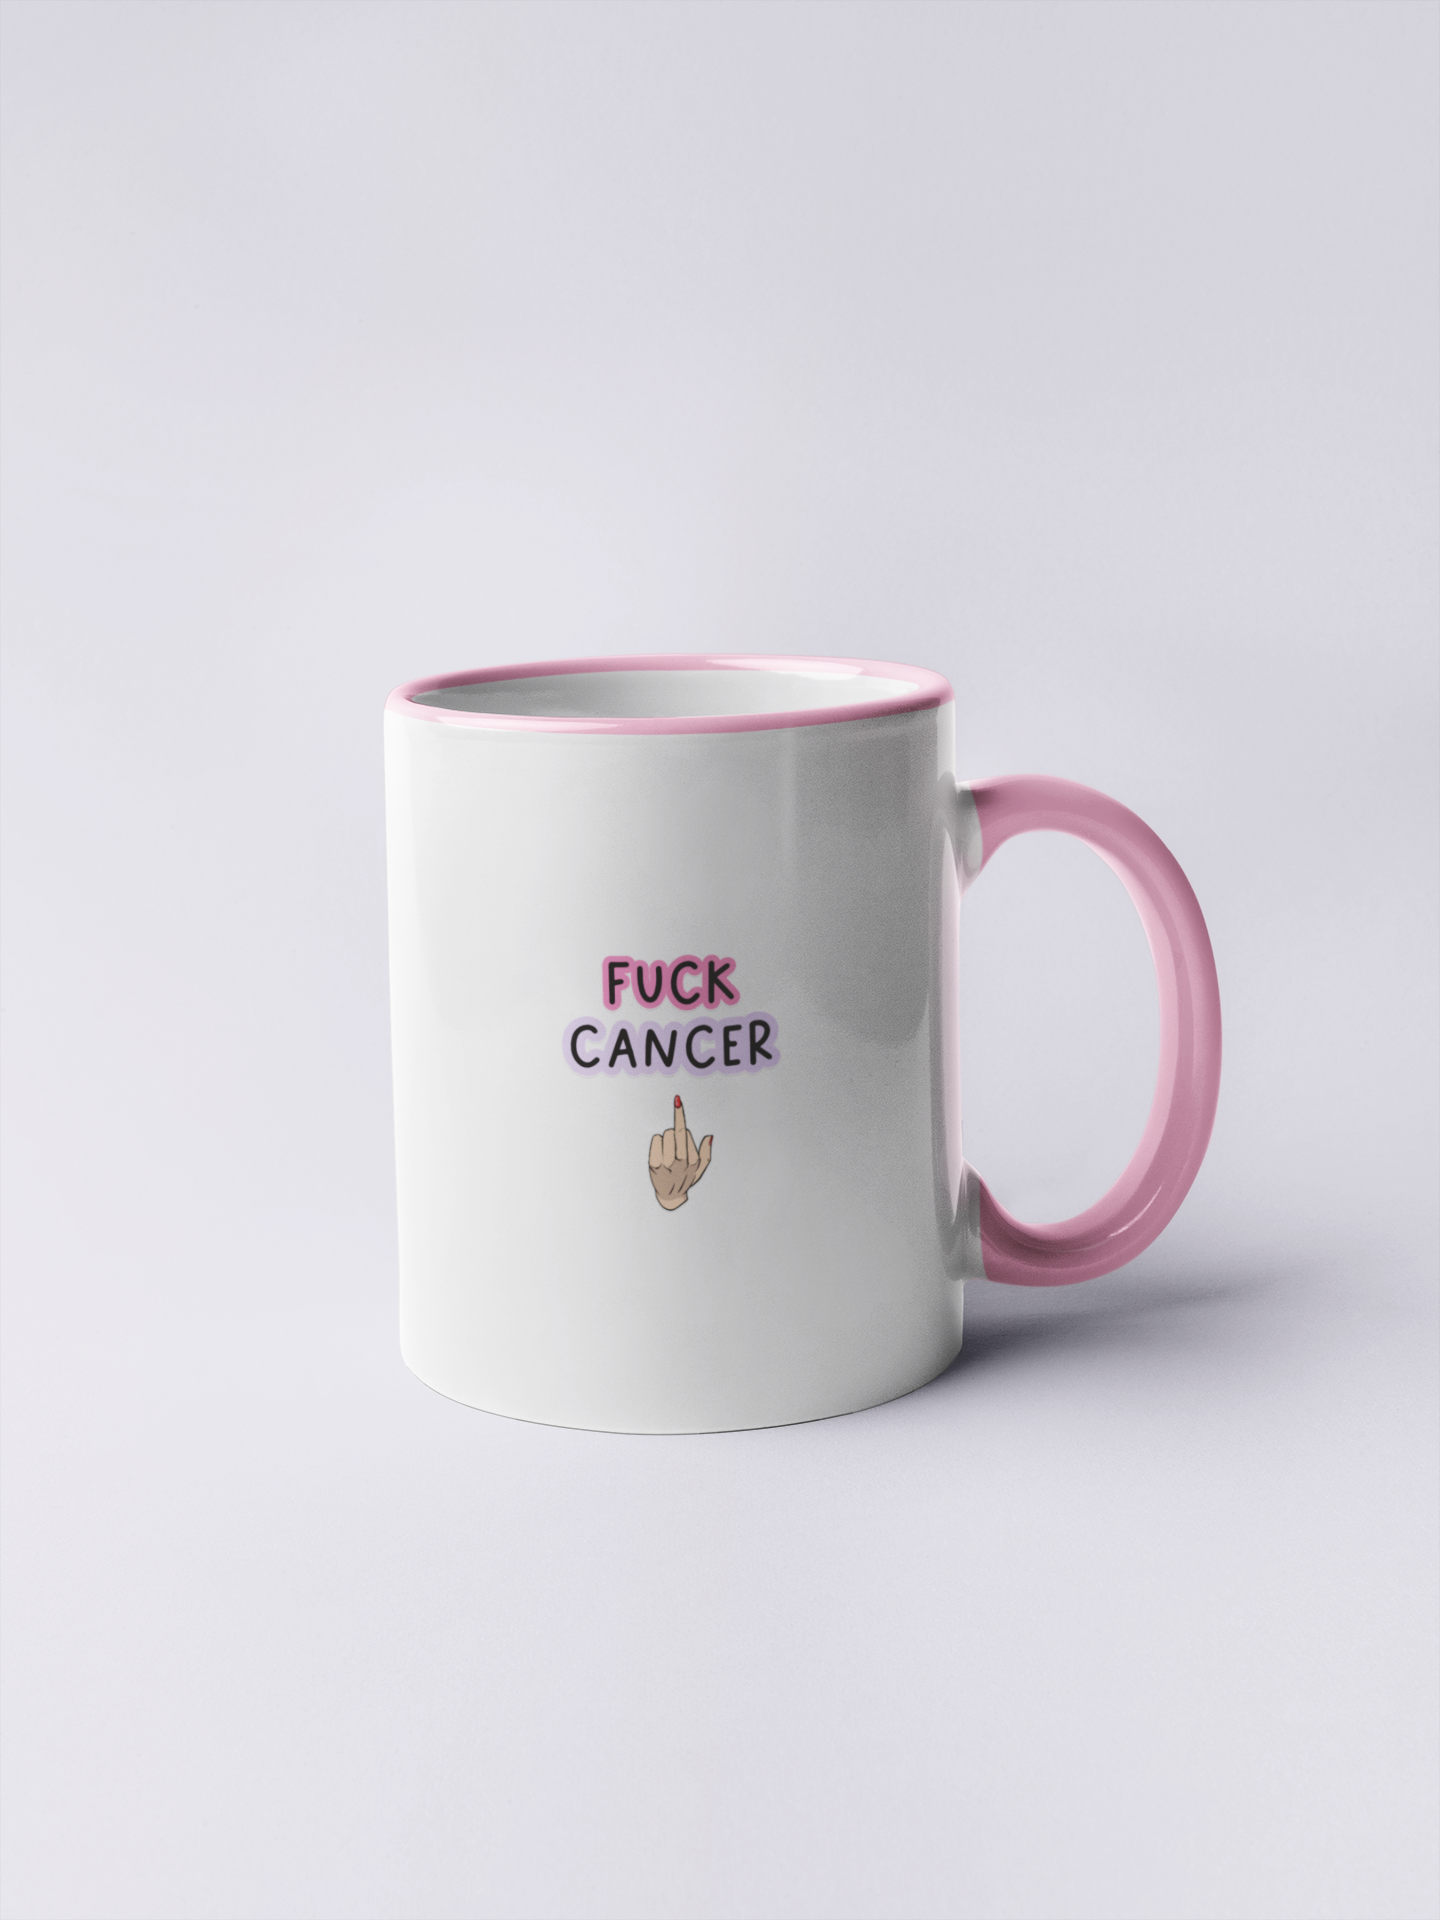 White mug with a pink inner & rim with a middle finger clipart in the centre. Above the middle finger design is the words 'fuck cancer', printed in black with a pink & purple outline.